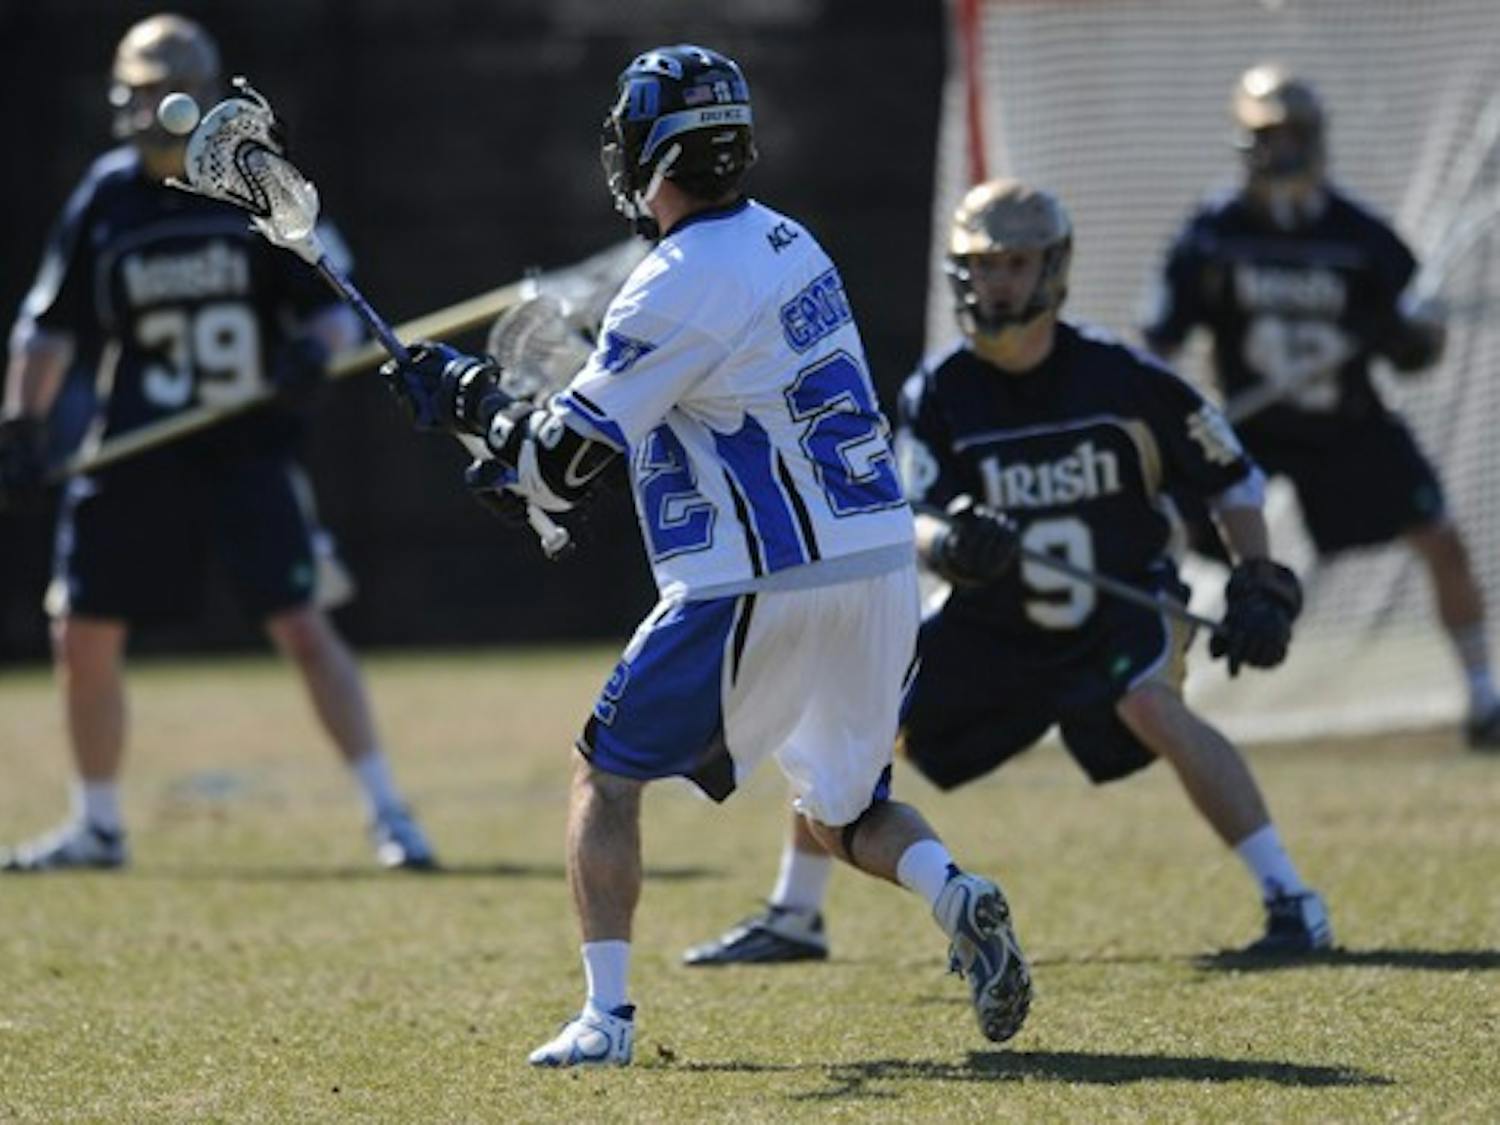 Senior Ned Crotty racked up five assists Saturday in Duke’s nine-goal victory over Penn State at home.